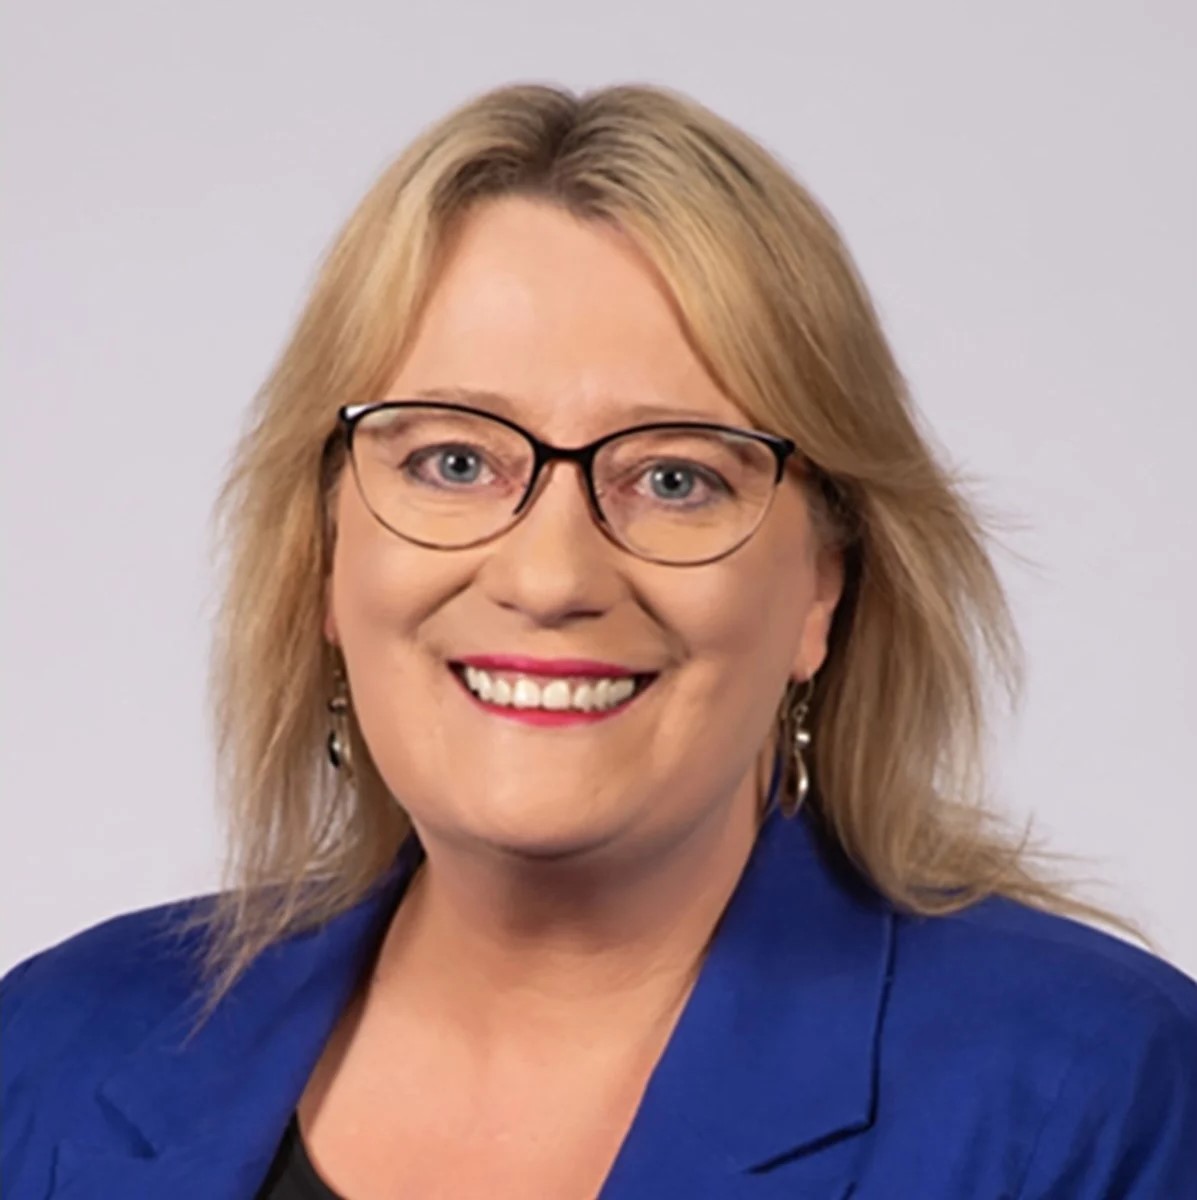 Image is a photograph of Victoria's Minister for Agriculture, Ros Spence